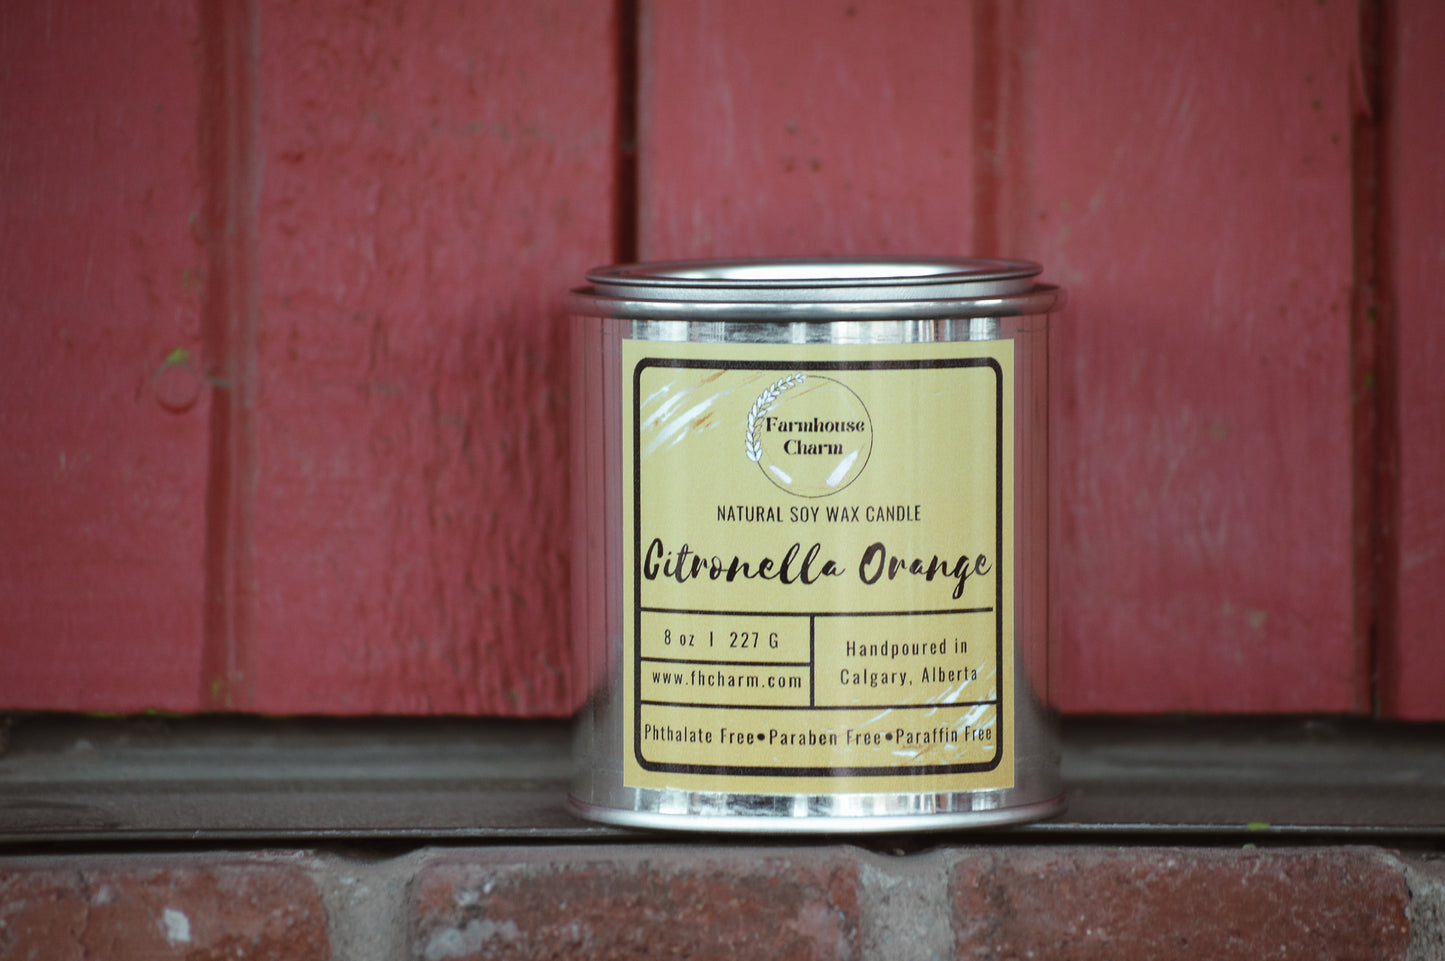 Keep the mosquitos away with this outdoor Citronella Orange- Farmhouse Charm Natural Soy Candle. Its a blend of citrusy orange and bug repellant citronella. size: 8 oz. (227 g) Citronella Orange- Farmhouse Charm Natural Soy Candle is made with 100% natural soy wax. The candle is dye free, paraben free and phthalate free. No other additives added.